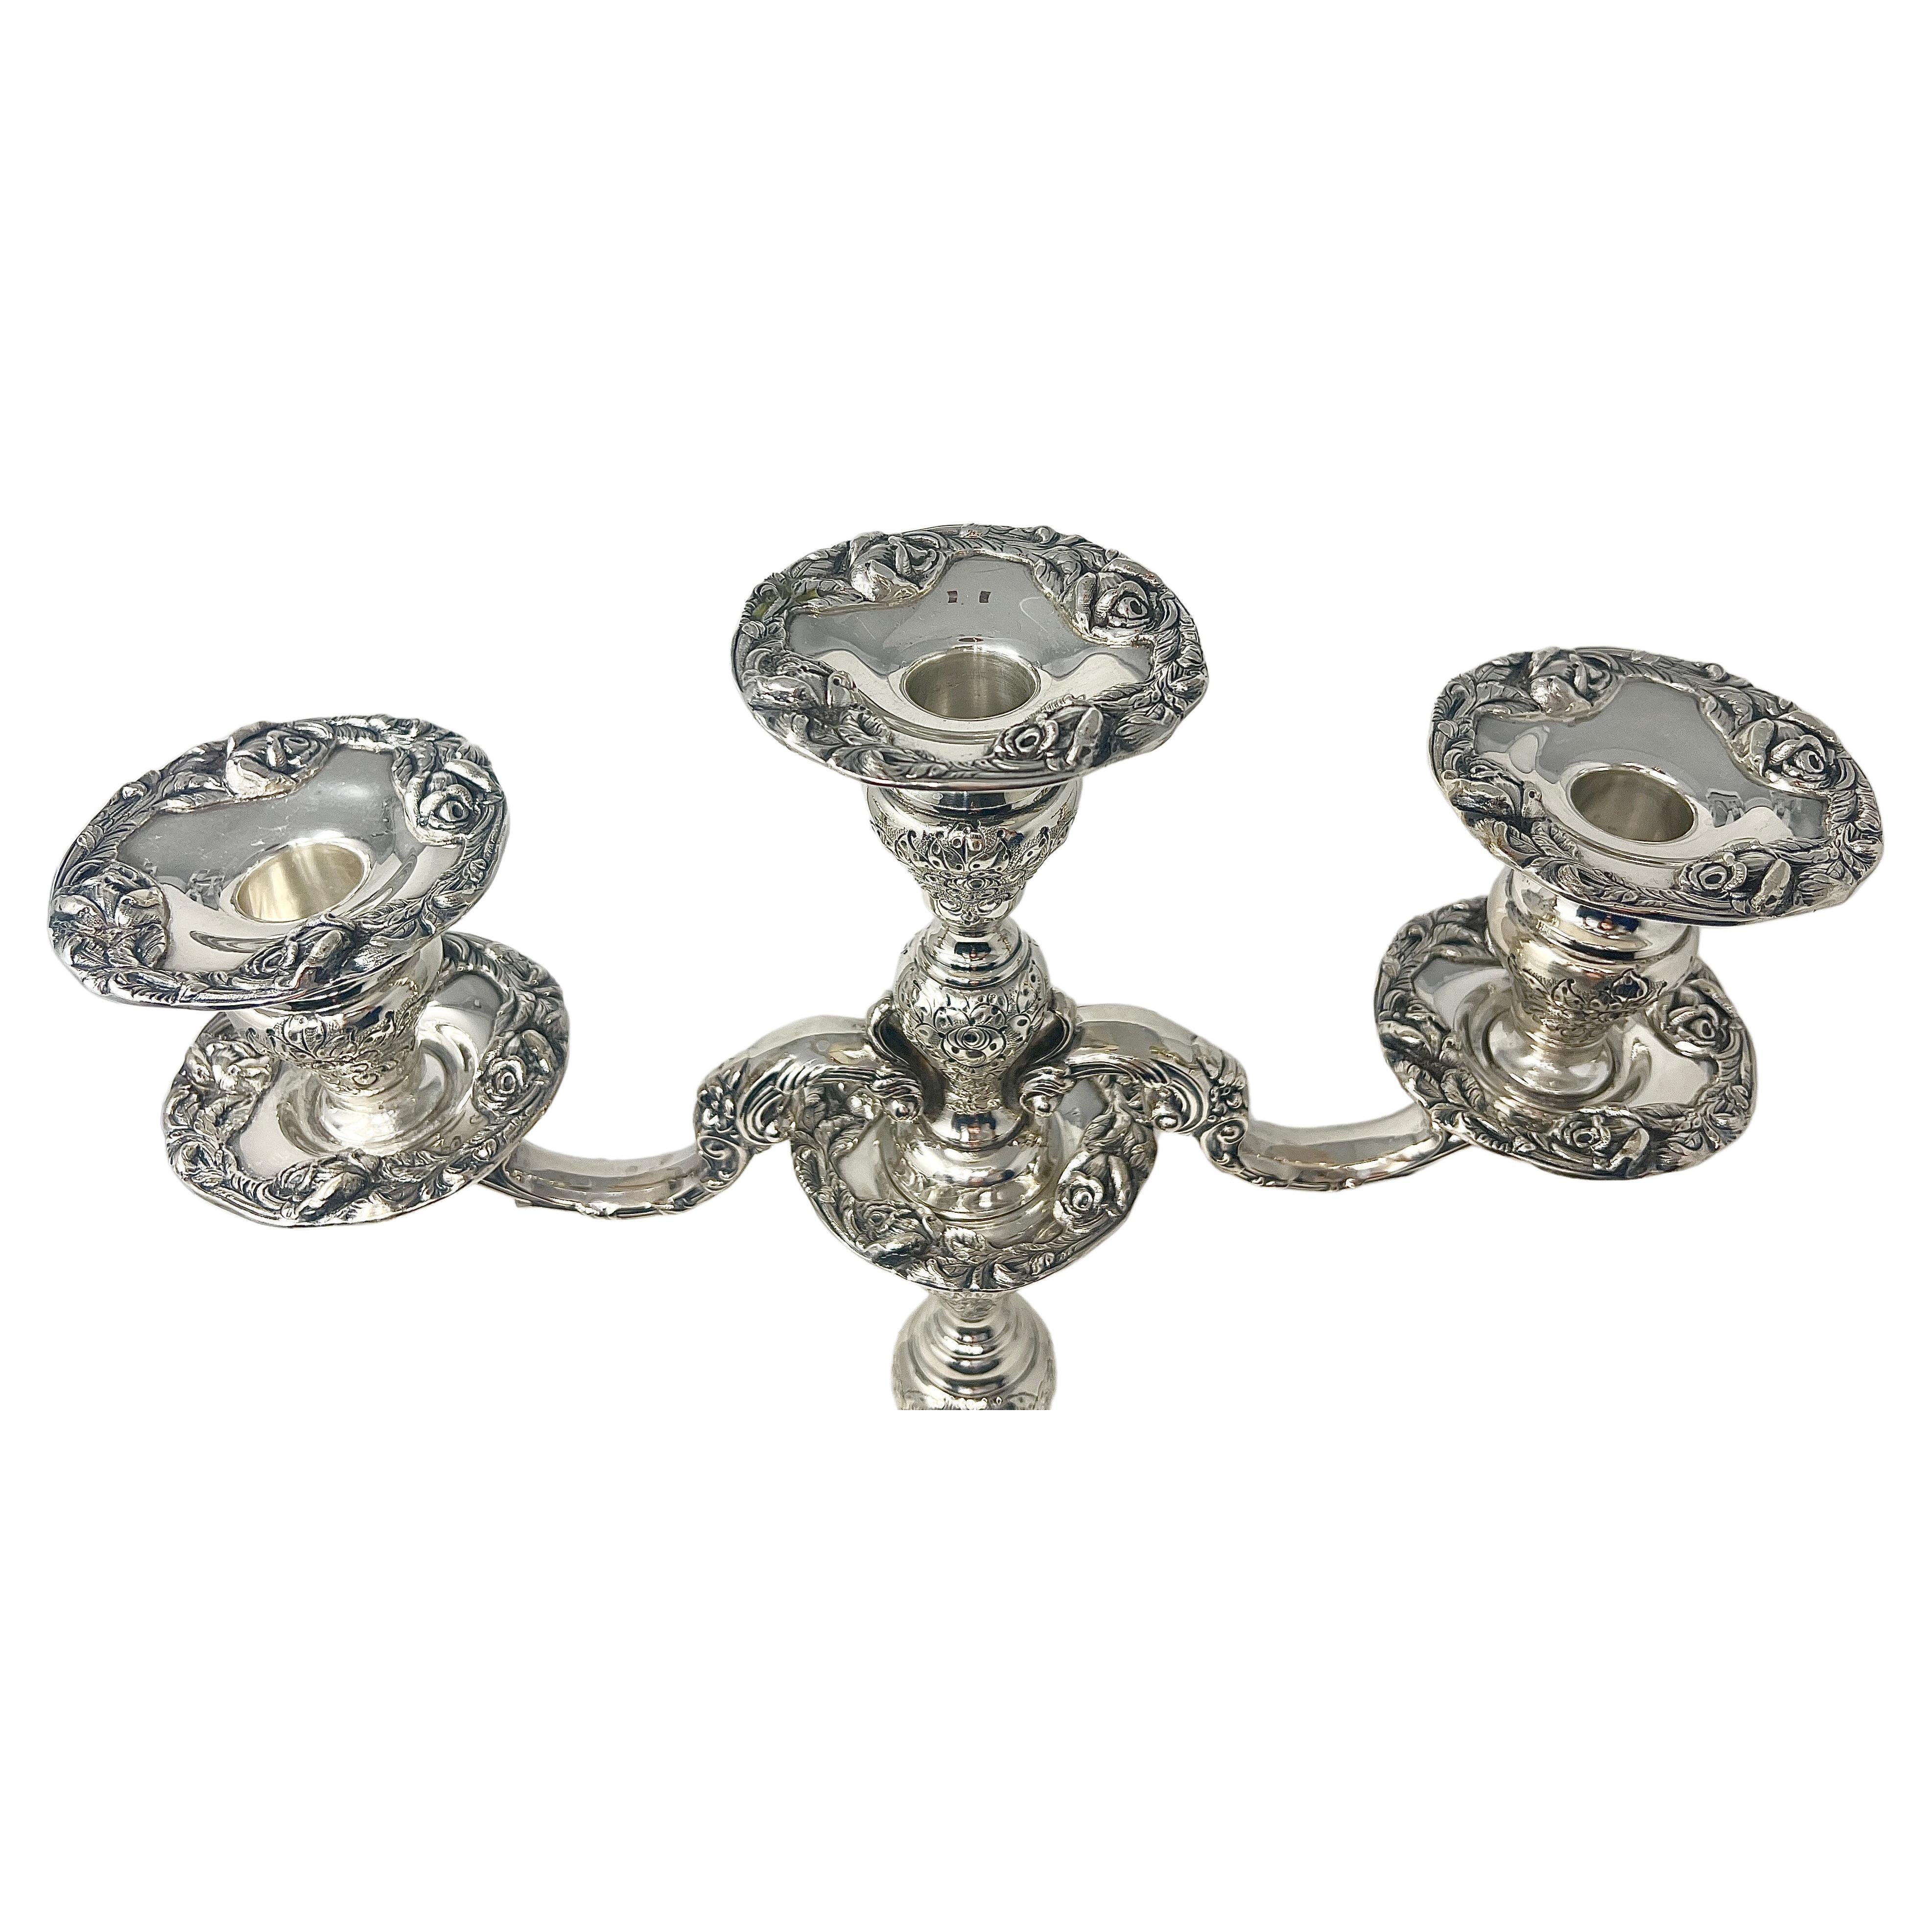 Exquisite Antique American Sterling Silver Candelabra Signed 